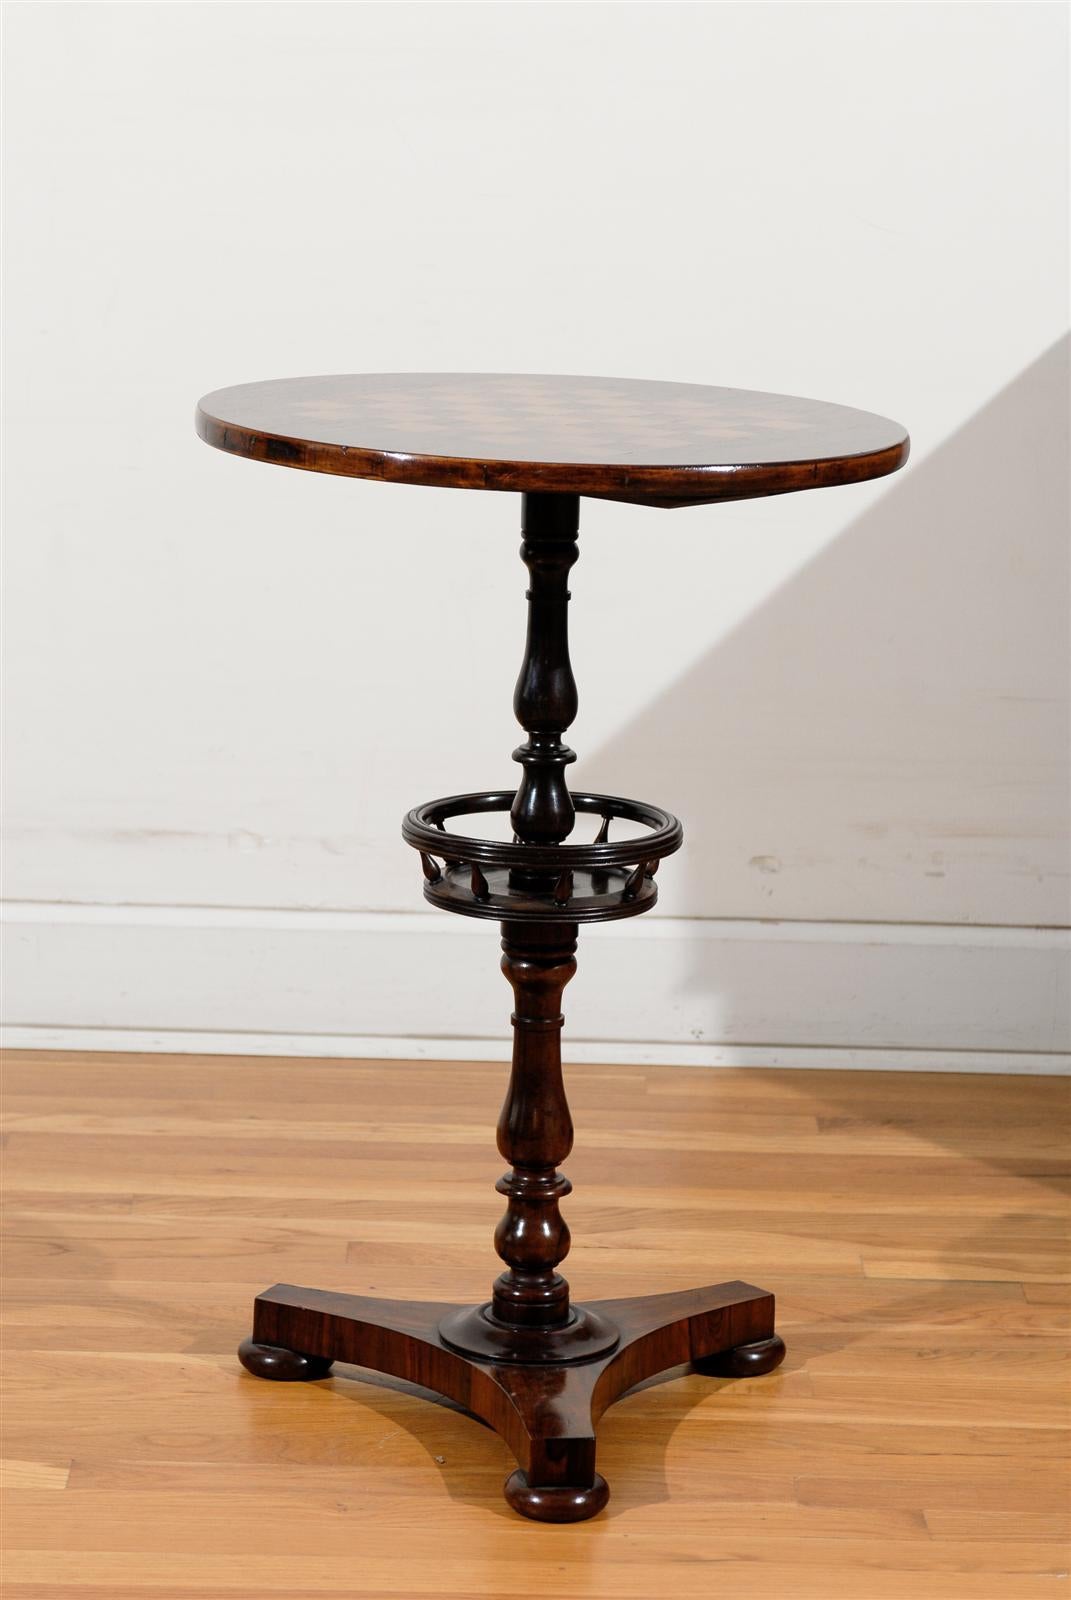 An English rosewood games table with checkerboard inlaid top and pedestal base from the second half of the 19th century. This English gueridon side table features a circular top, exquisitely adorned with an inlaid checkerboard. The table is raised